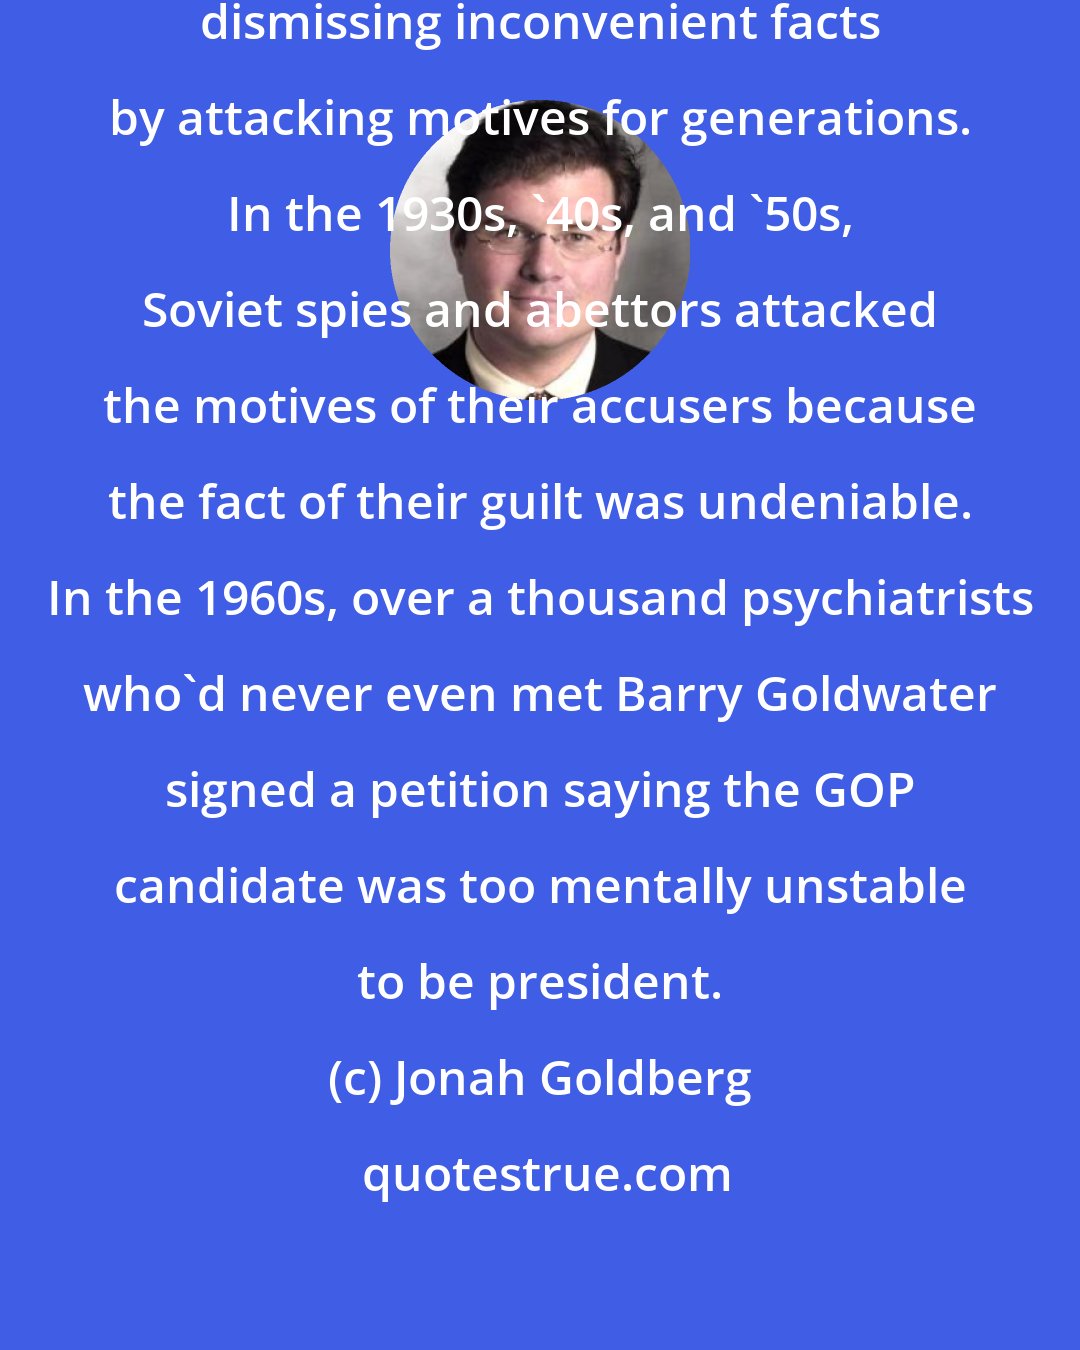 Jonah Goldberg: Liberals and leftists have been dismissing inconvenient facts by attacking motives for generations. In the 1930s, '40s, and '50s, Soviet spies and abettors attacked the motives of their accusers because the fact of their guilt was undeniable. In the 1960s, over a thousand psychiatrists who'd never even met Barry Goldwater signed a petition saying the GOP candidate was too mentally unstable to be president.